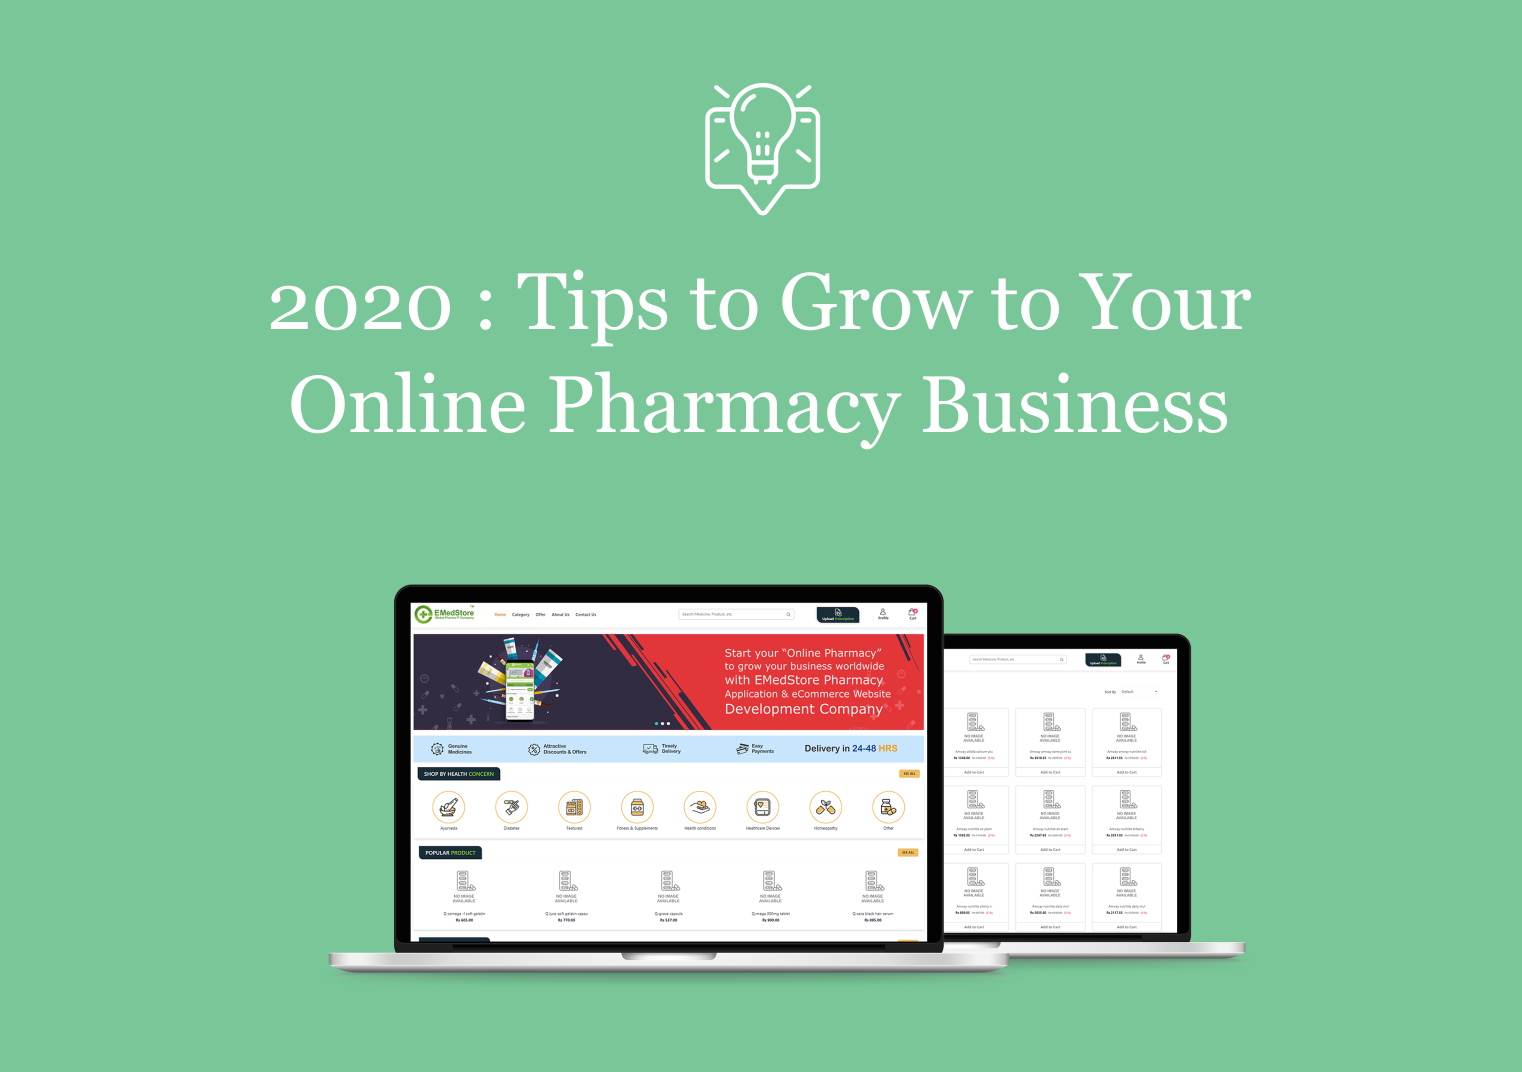 2020: Tips to Grow to Your Online Pharmacy Business